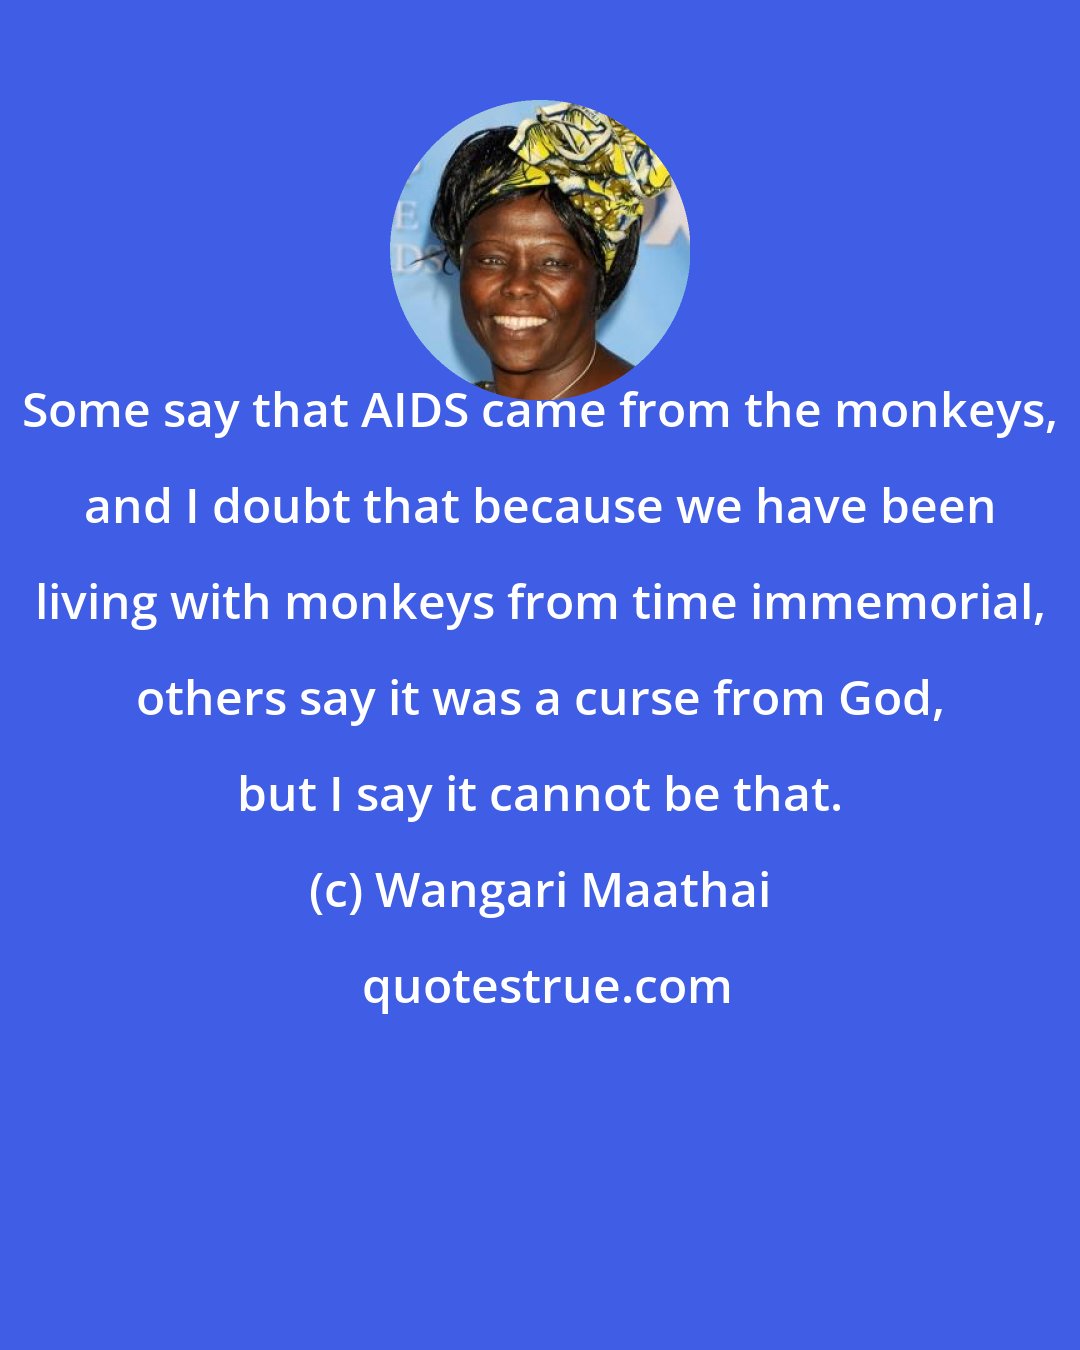 Wangari Maathai: Some say that AIDS came from the monkeys, and I doubt that because we have been living with monkeys from time immemorial, others say it was a curse from God, but I say it cannot be that.